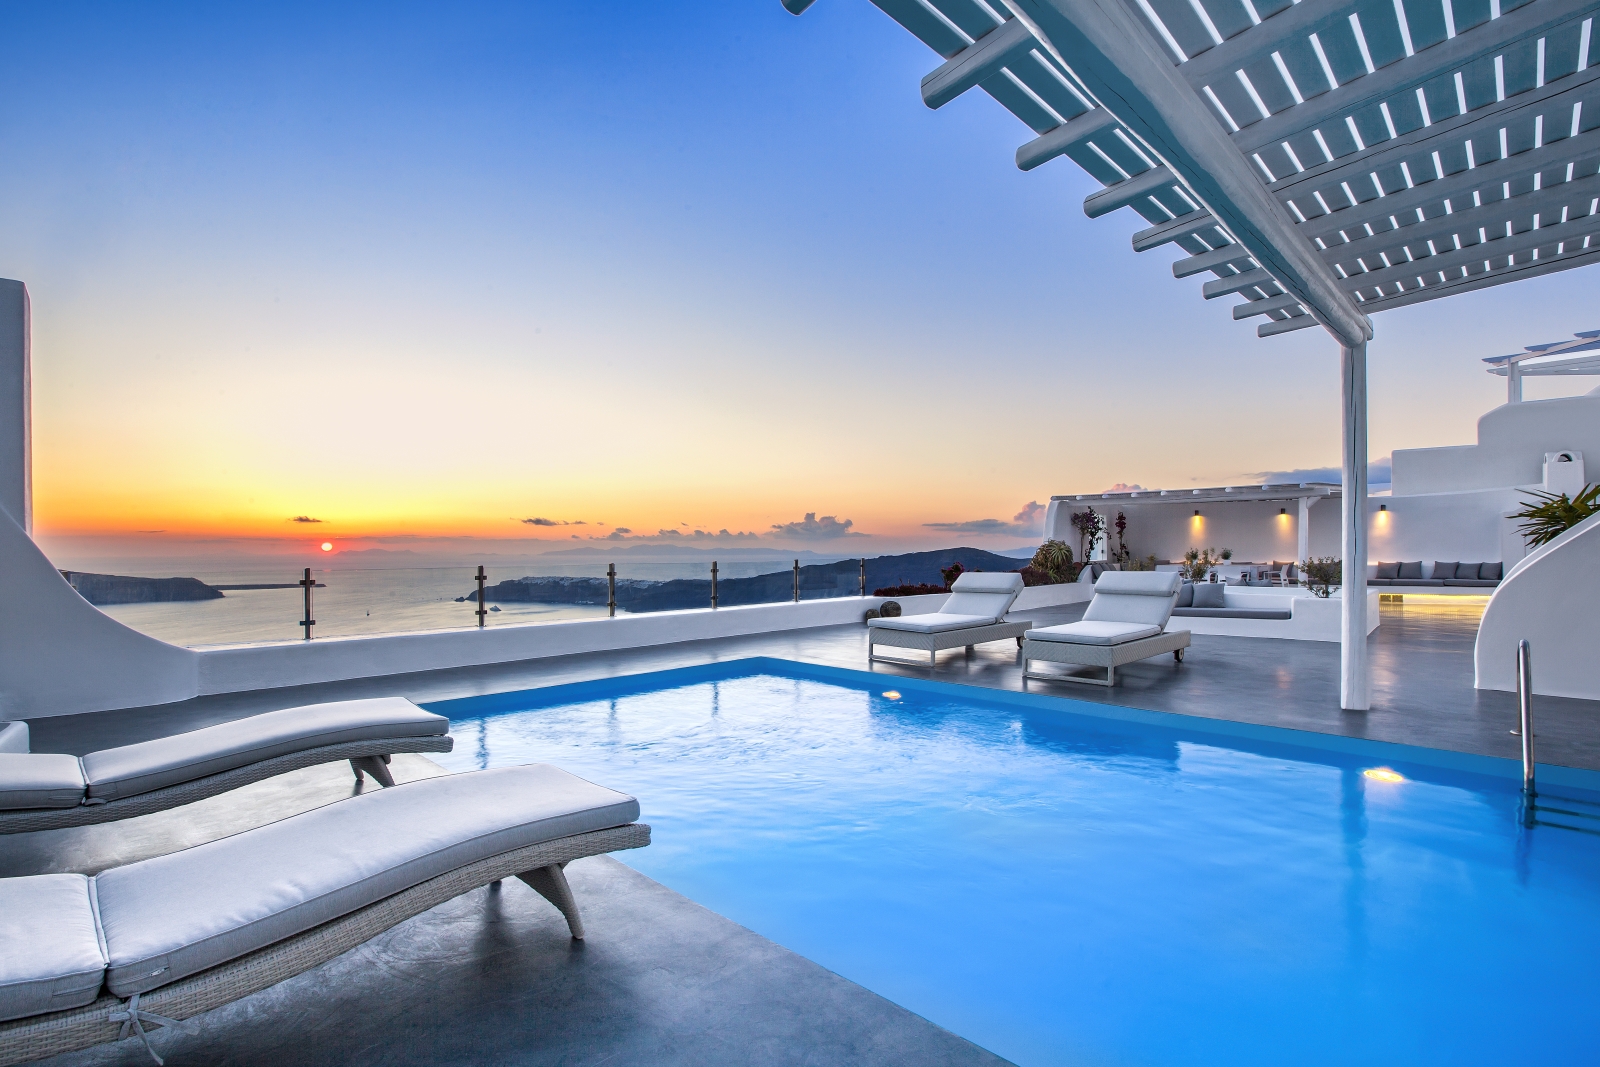 Pool and pool area with sun loungers and sunset sea view at Erossea on Santorini, Greece